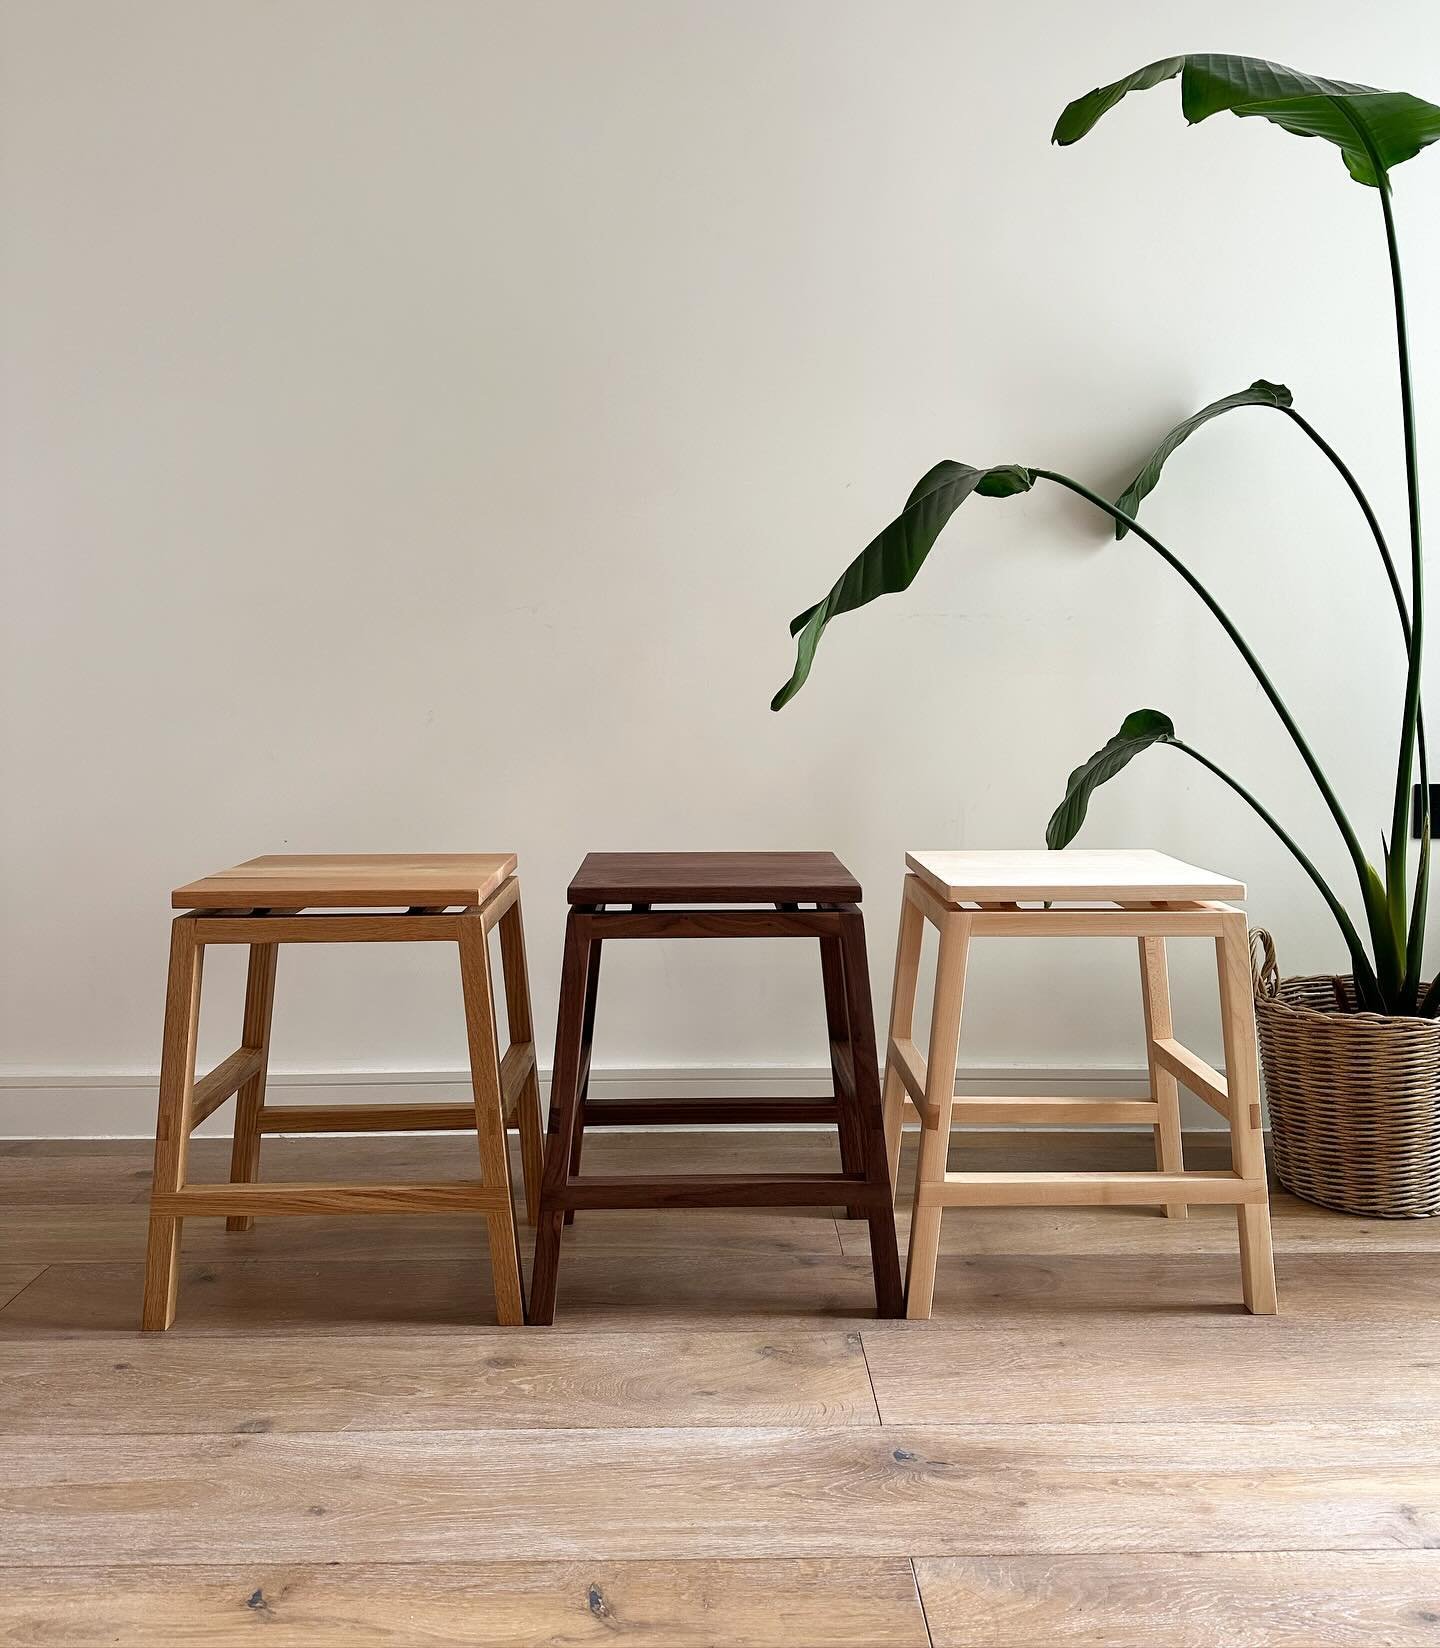 Our 'Lutang' Stools in maple, walnut and oak. Available to order now - lead time 6 weeks! These will be on our website very soon but send us over a DM if you're interested. &pound;290 each.